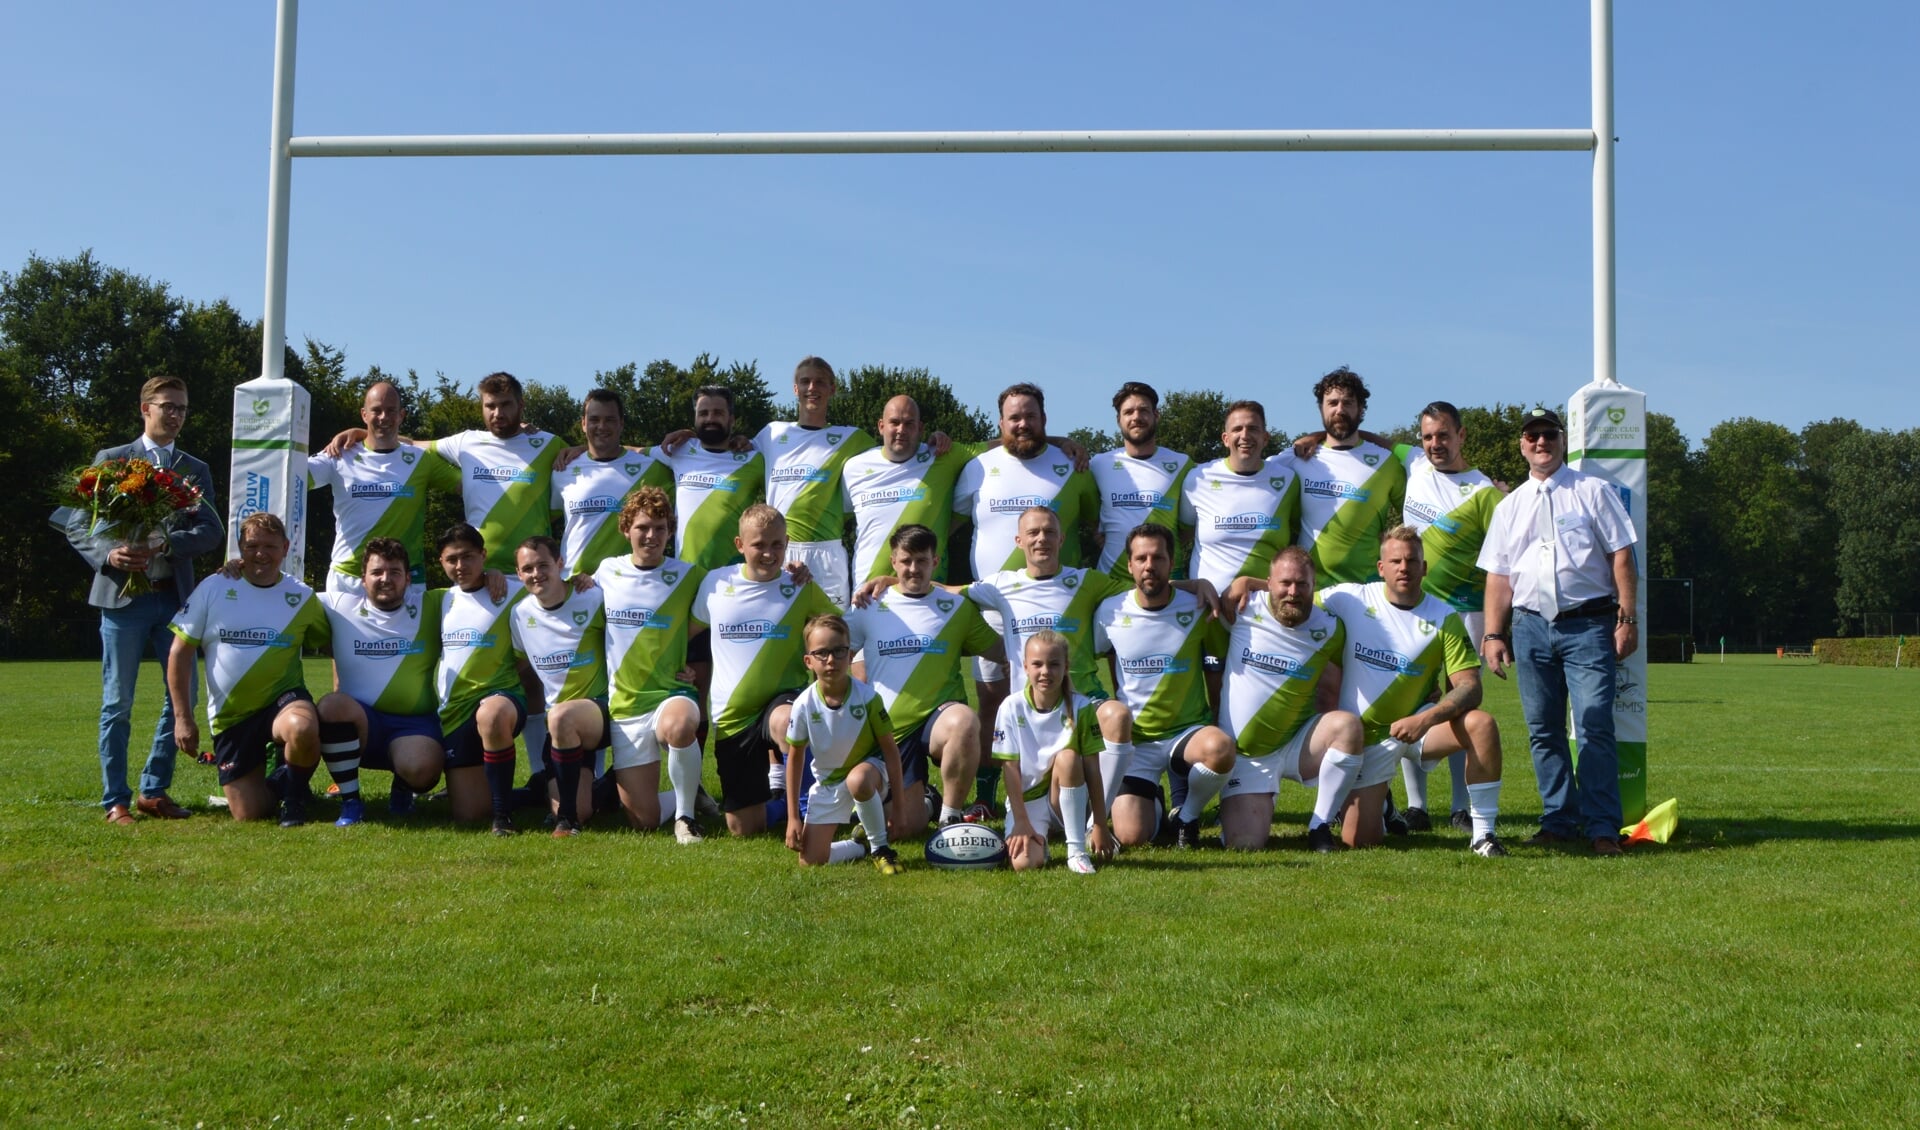 Rugby Club Dronten.